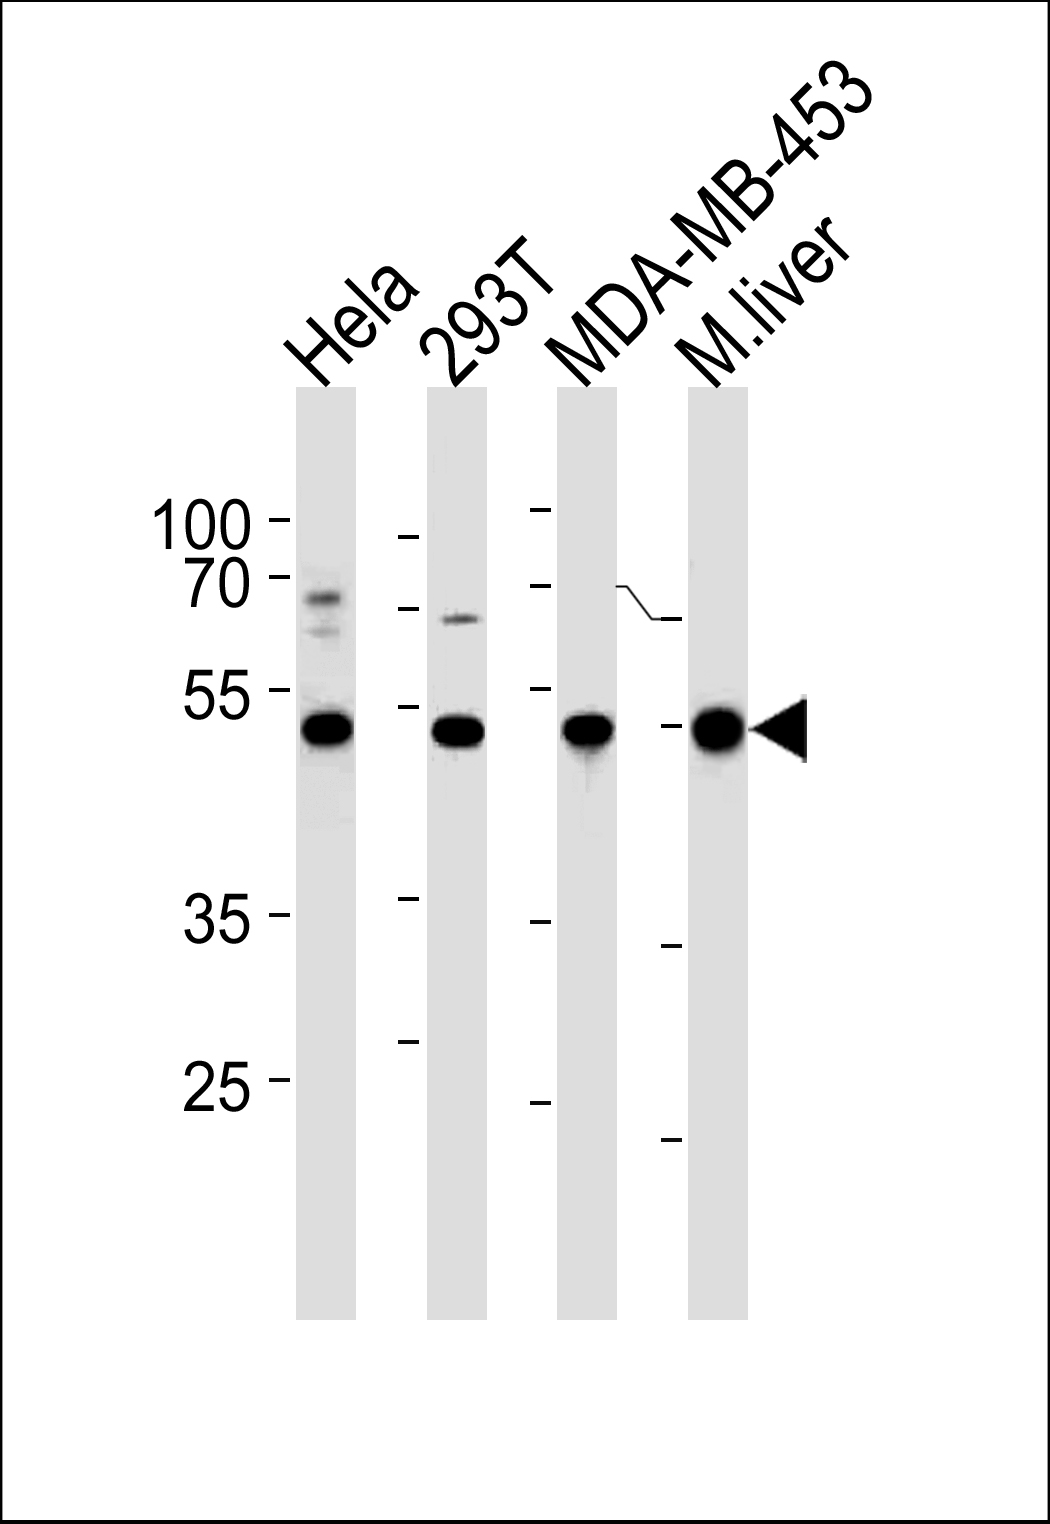 GSS Antibody (C-term) (Cat.# AP6895b) western blot analysis in Hela,293T,MDA-MB-453 cell line and mouse liver tissue lysates (35ug/lane).This demonstrates the GSS antibody detected the GSS protein (arrow).